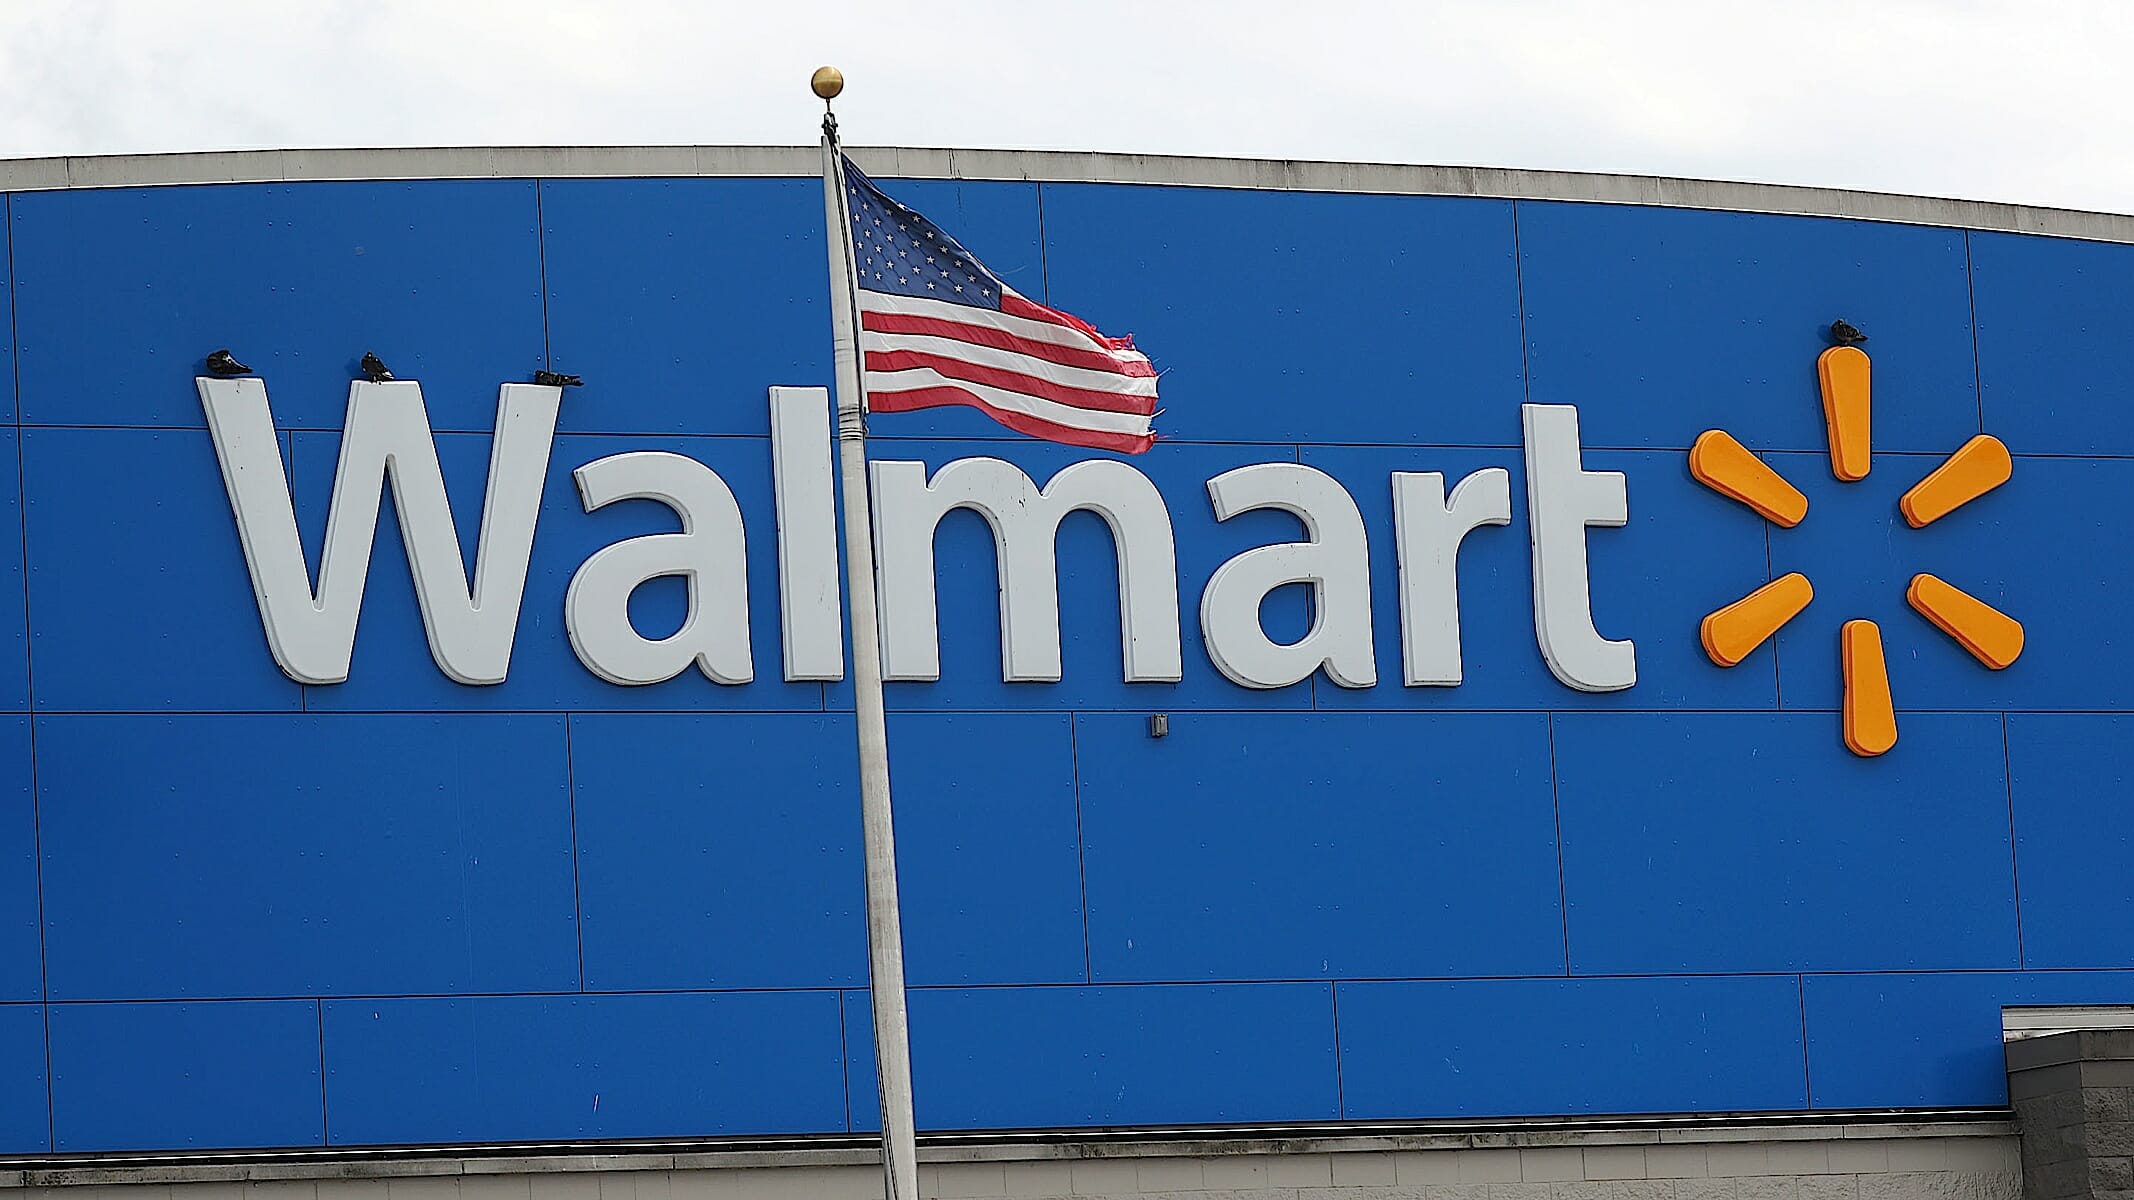 This Walmart PR Tactic in the Wake of the El Paso Shooting Is Embarrassing and Inadequate